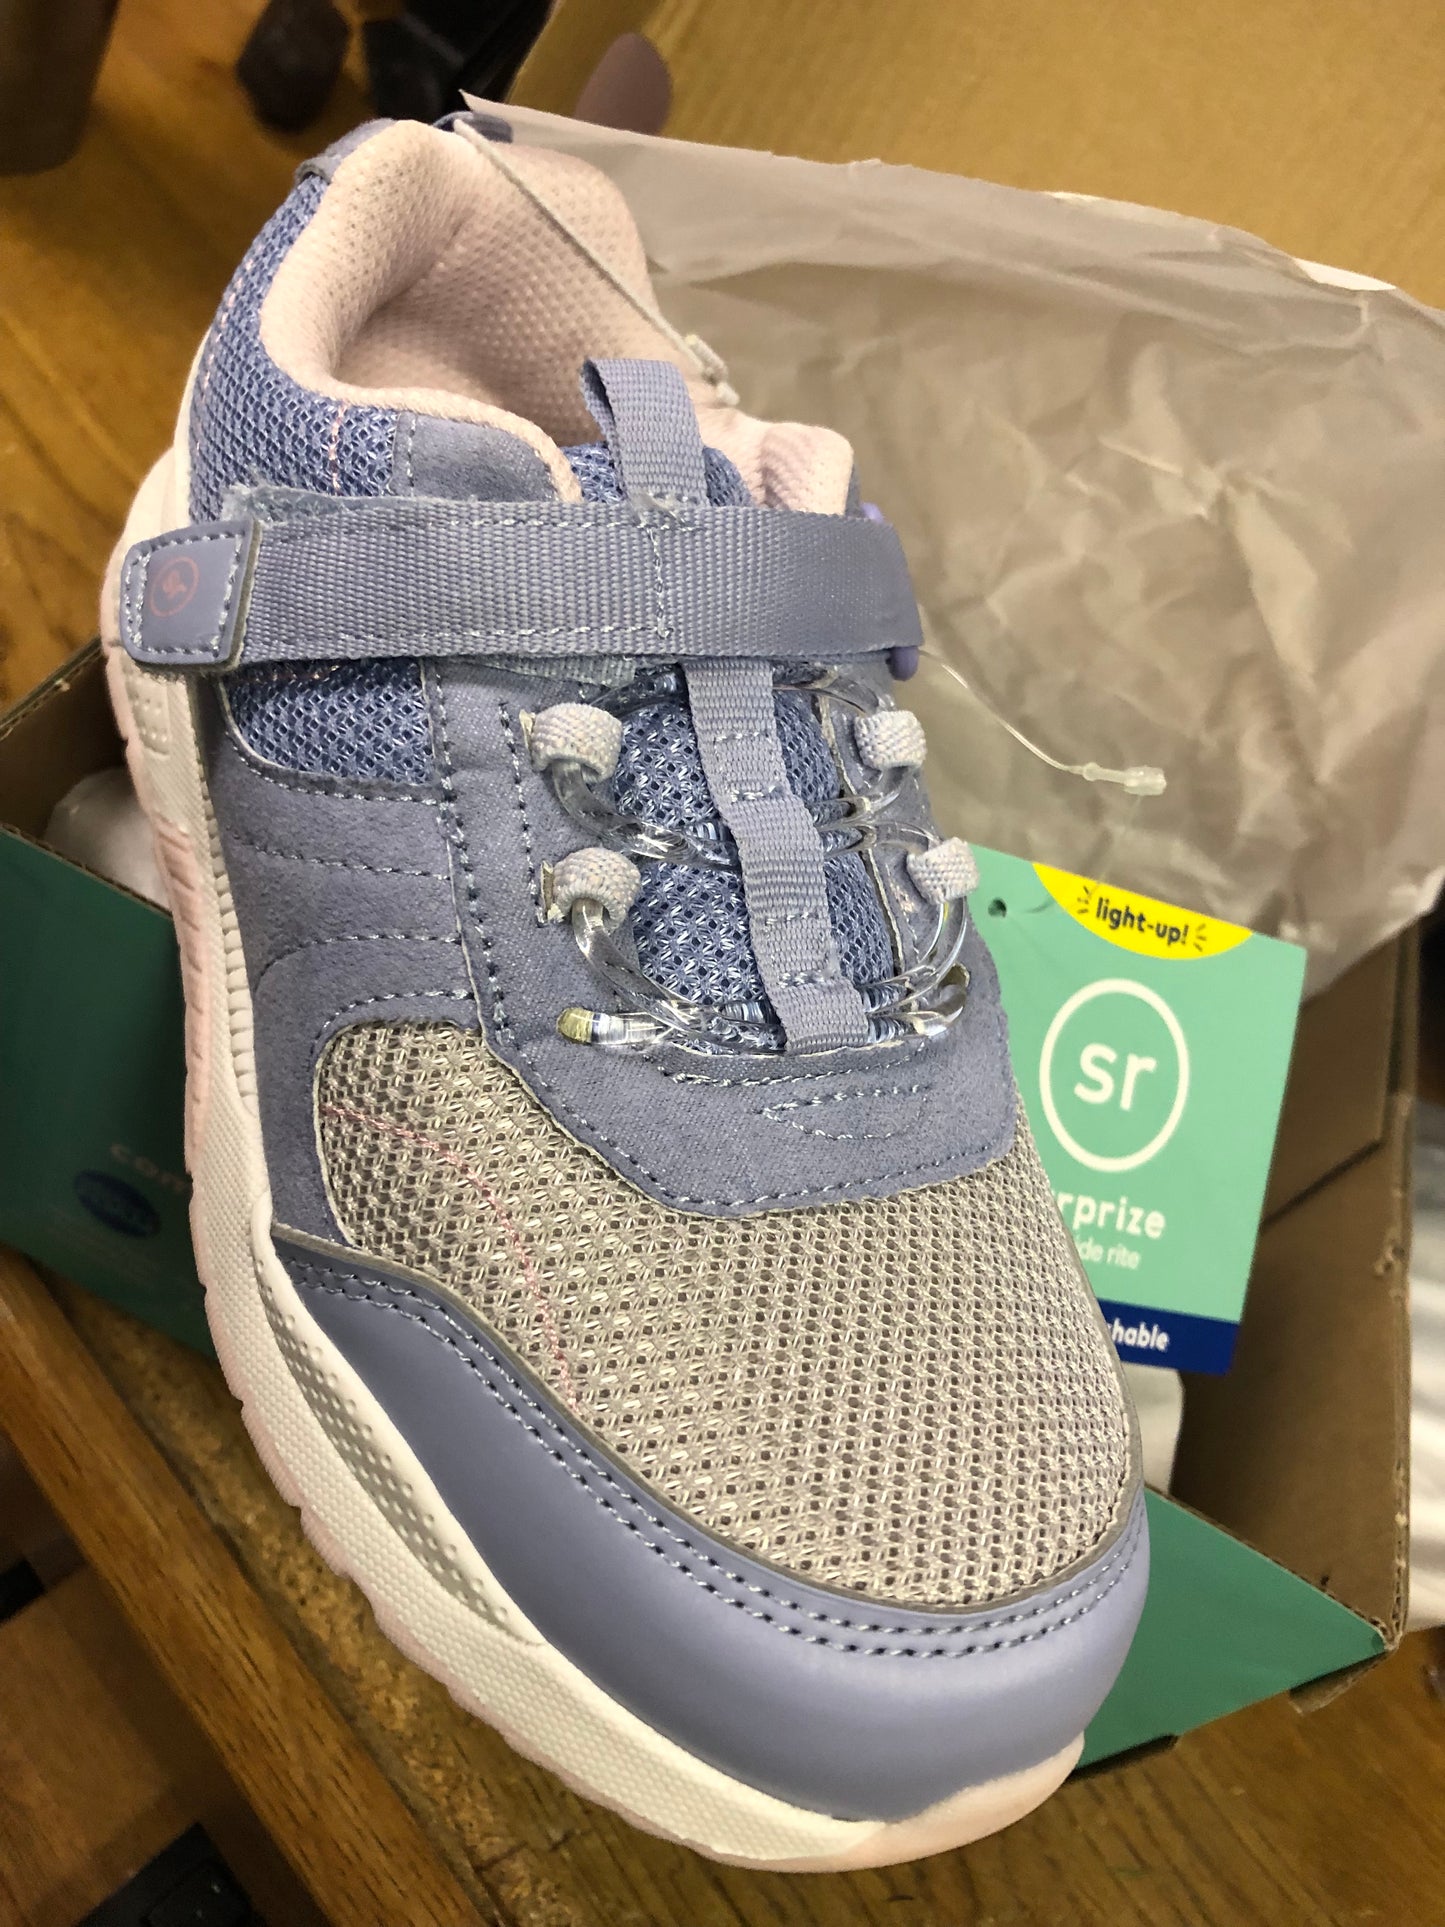 (Kids) Girls Light -Up Sneaker Memory Form Color Blue/White Size 12 By Stride Rite